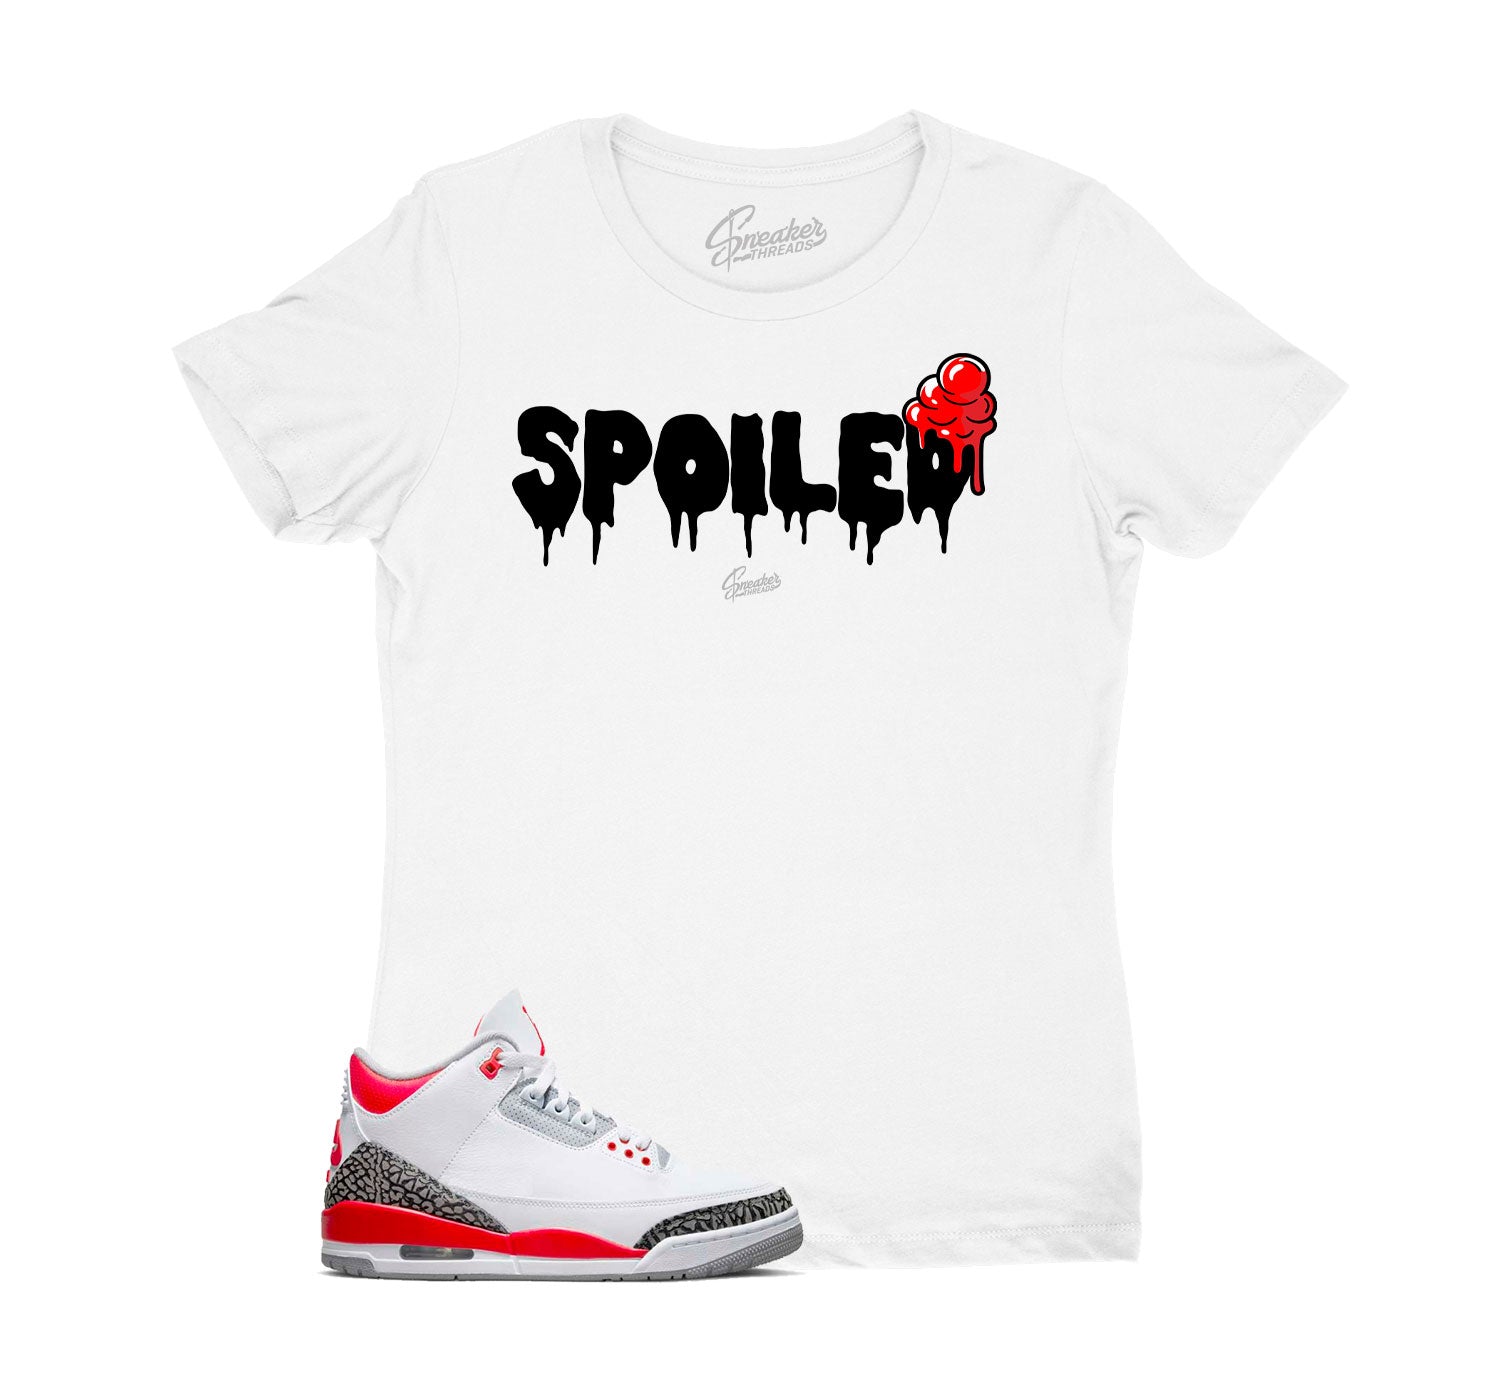 Womens Fire Red 3 Shirt - Spoiled - White